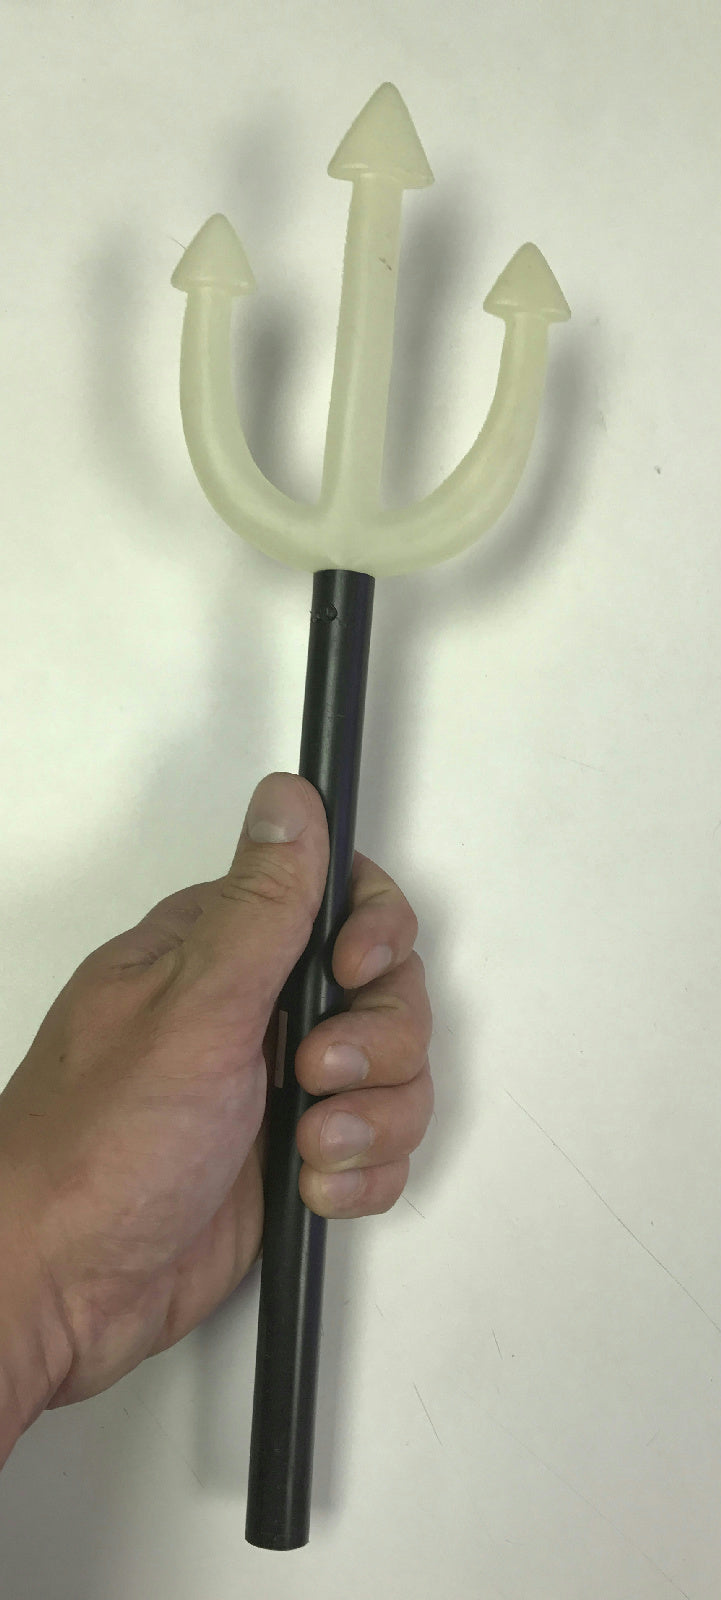 Glow-in-the-Dark Trident Weapon Costume Accessory